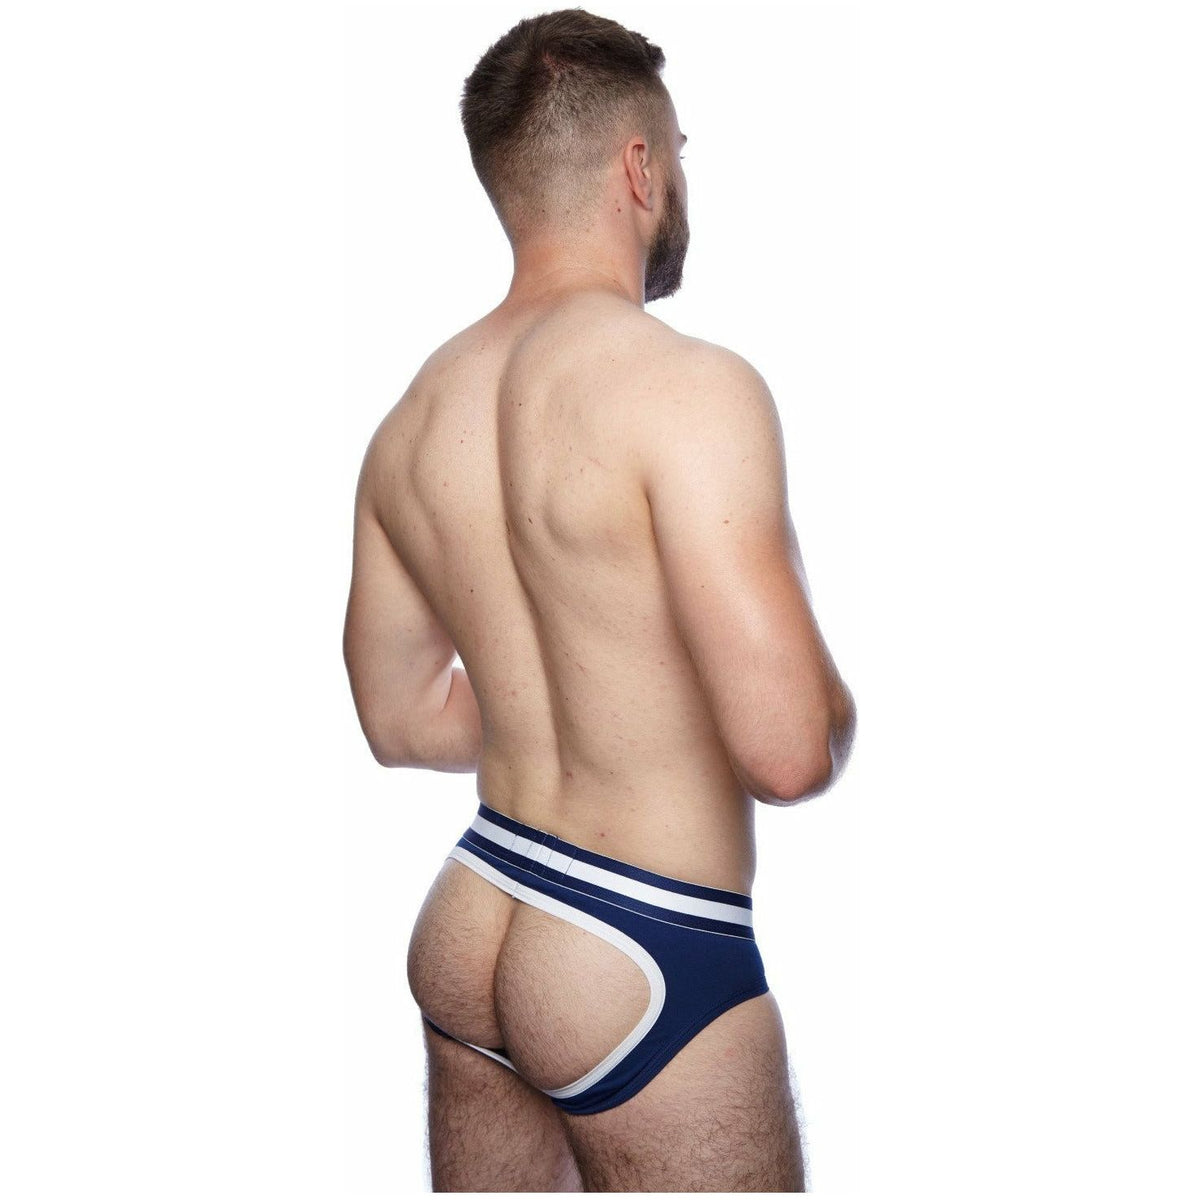 Prowler Classic Backless Brief – Navy/White - Medium